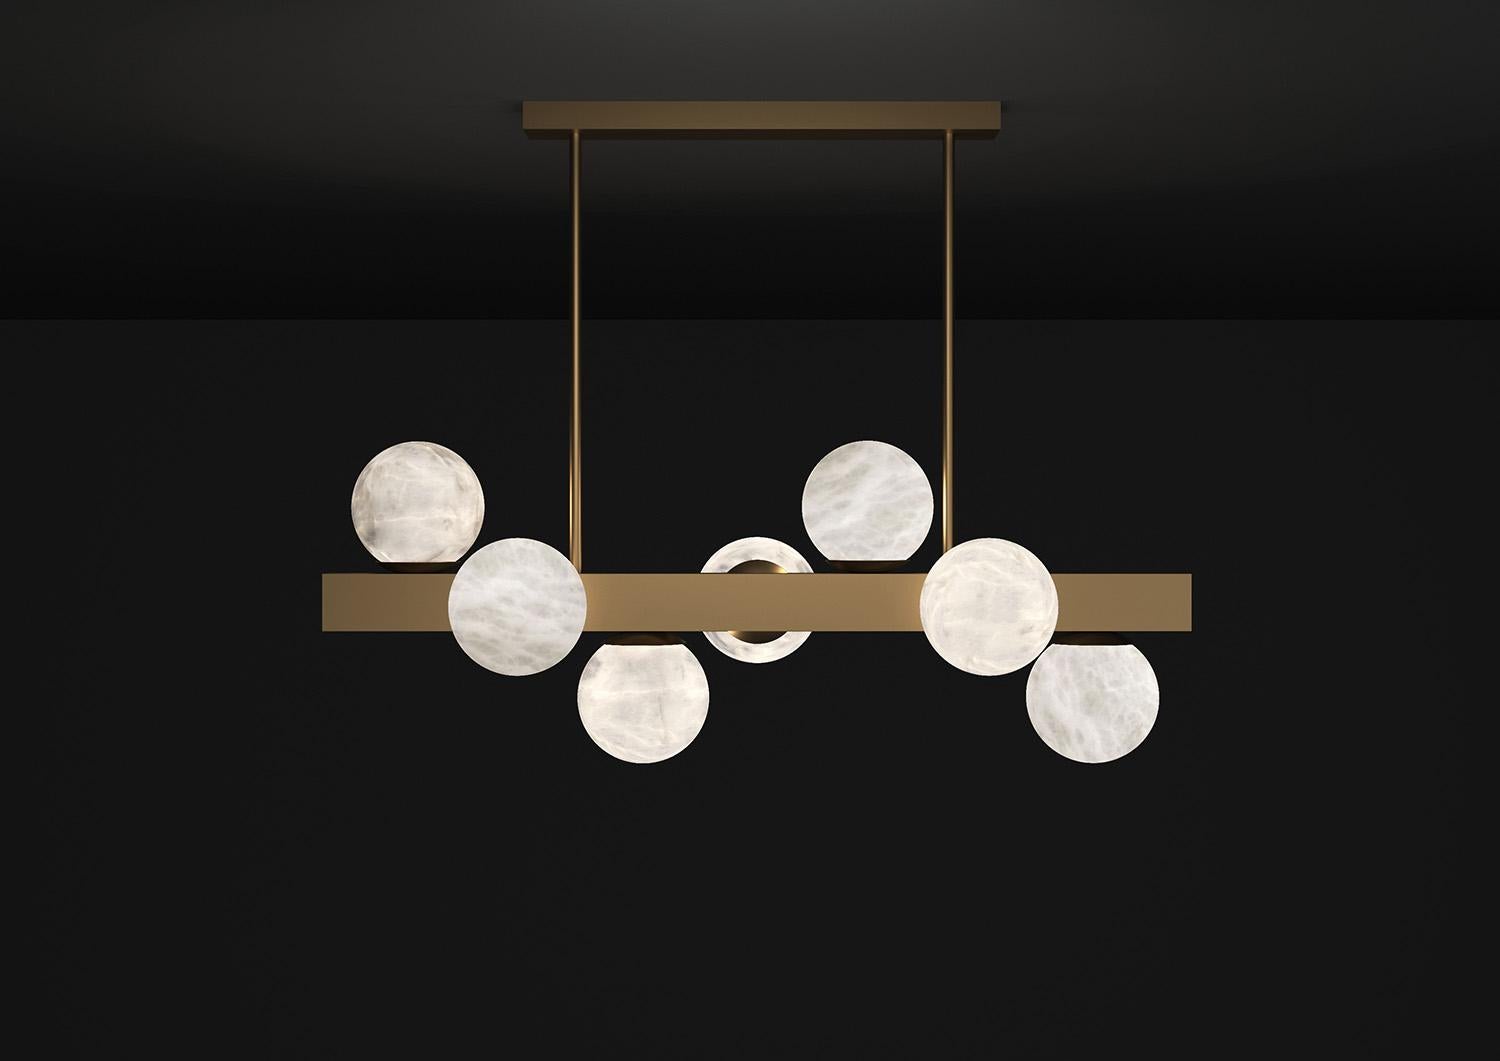 Dioniso Bronze Pendant Lamp by Alabastro Italiano
Dimensions: D 35 x W 91 x H 36 cm.
Materials: White alabaster and bronze.

Available in different finishes: Shiny Silver, Bronze, Brushed Brass, Ruggine of Florence, Brushed Burnished, Shiny Gold,